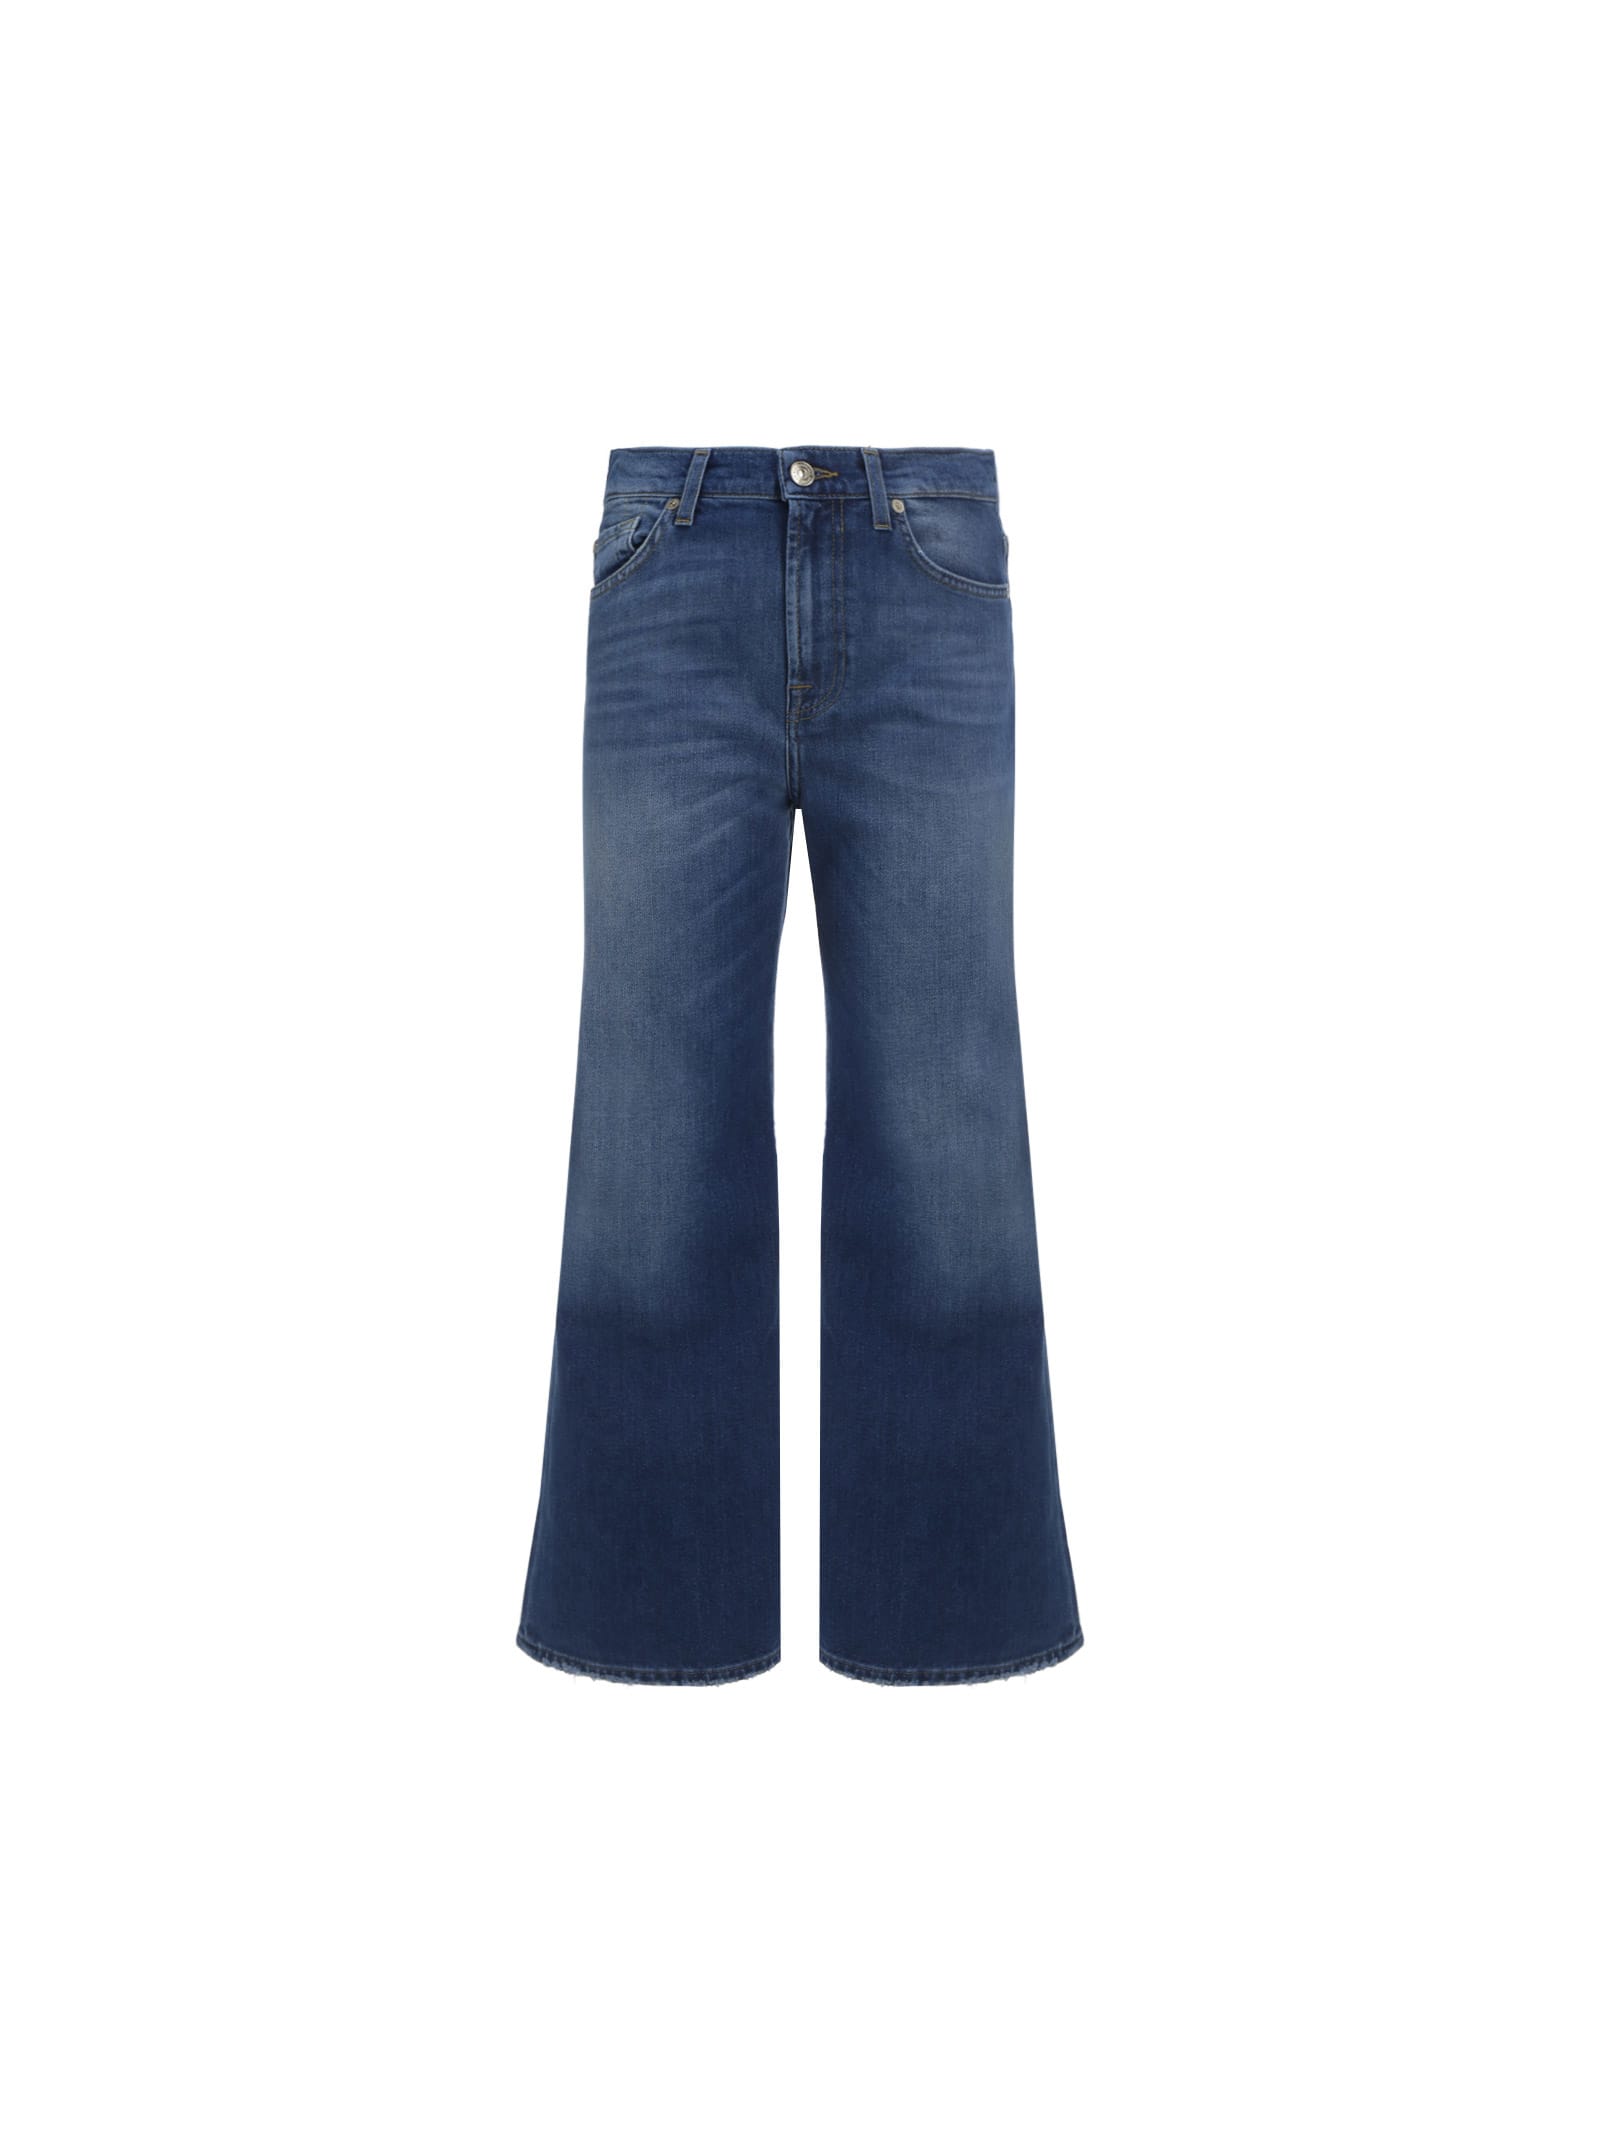 7 For All Mankind The Cropped Jeans